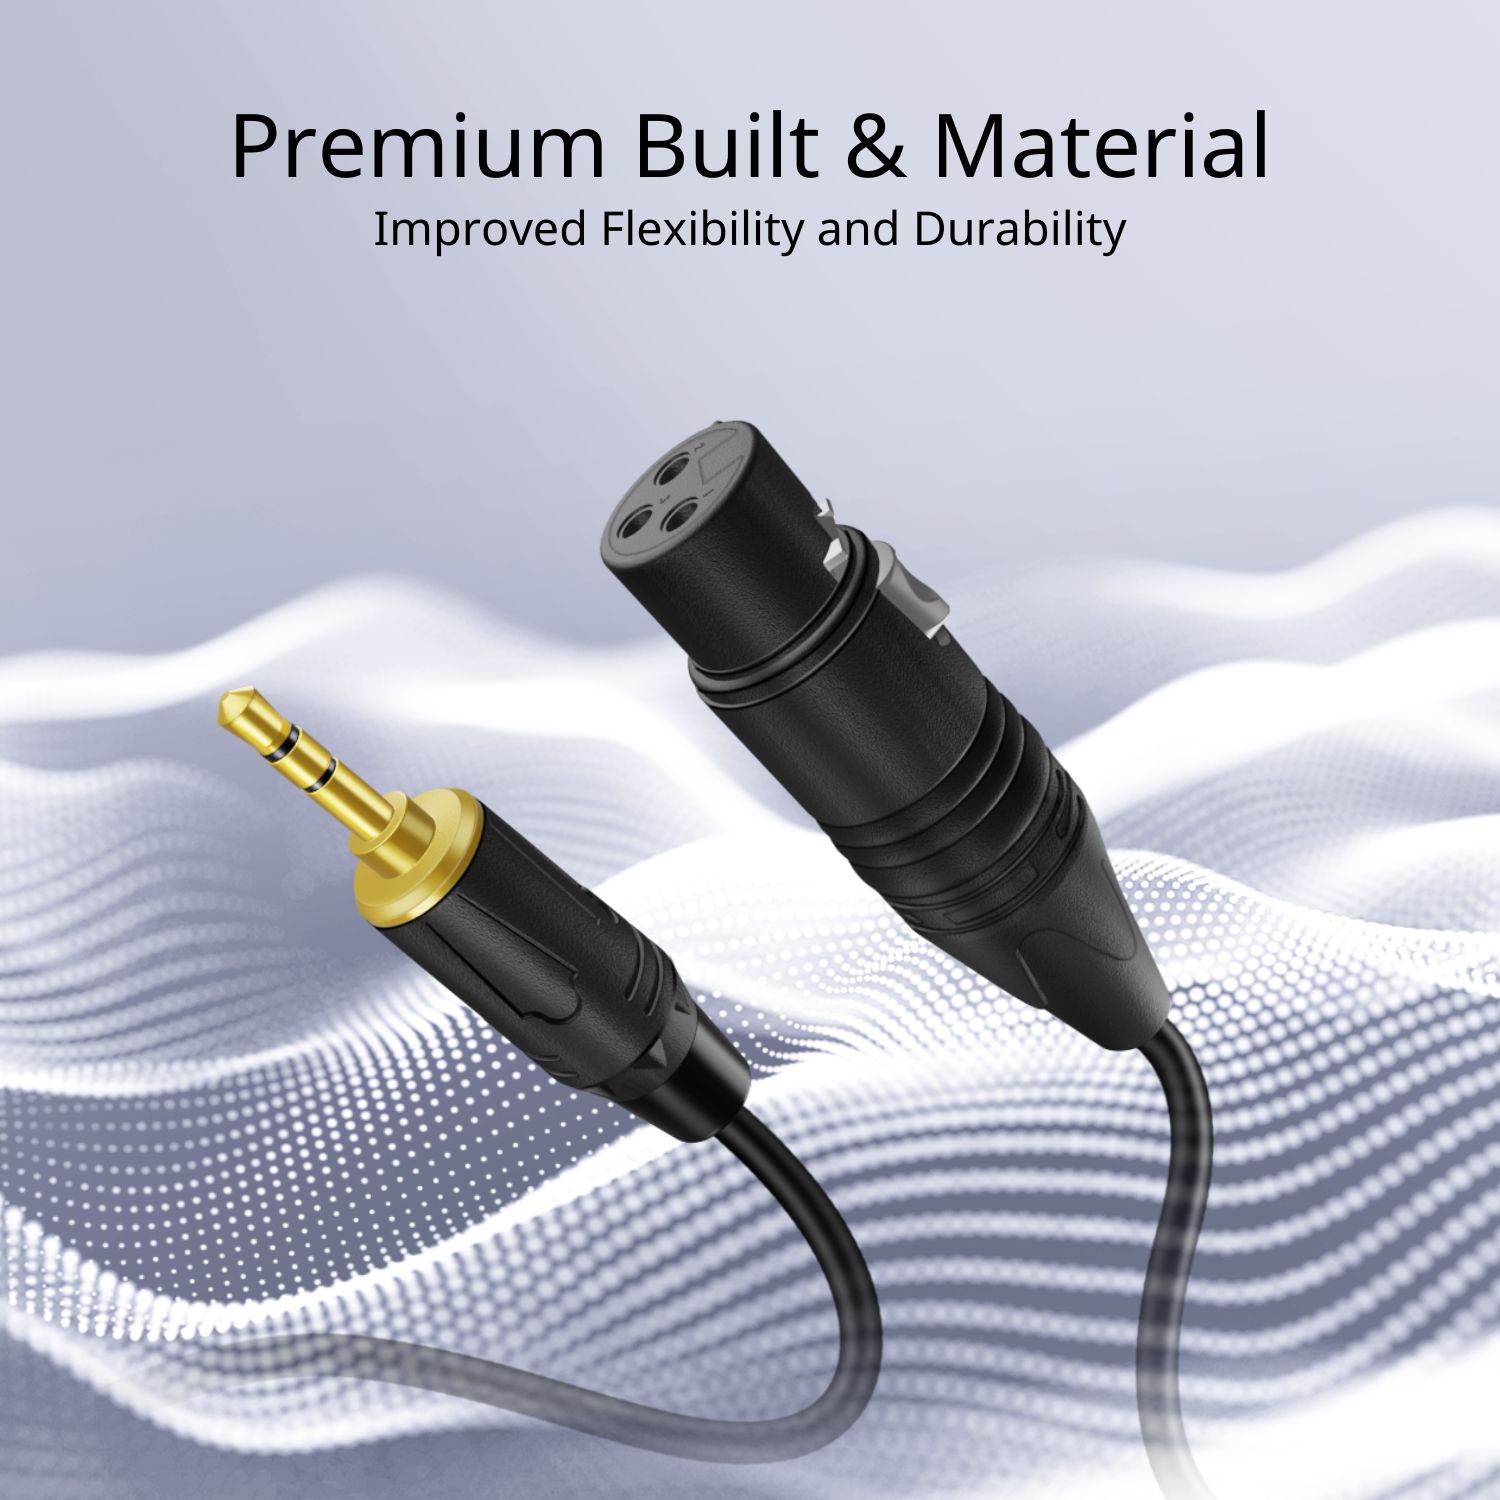 High-Grade Performance: This 1/8 to XLR cable delivers premium quality performance with oxygen-free copper (OFC) conductors; bare copper braided shielding provides maximum cancellation of distortion and interference; gives full-range bass to microphones, mixers, and wireless systems